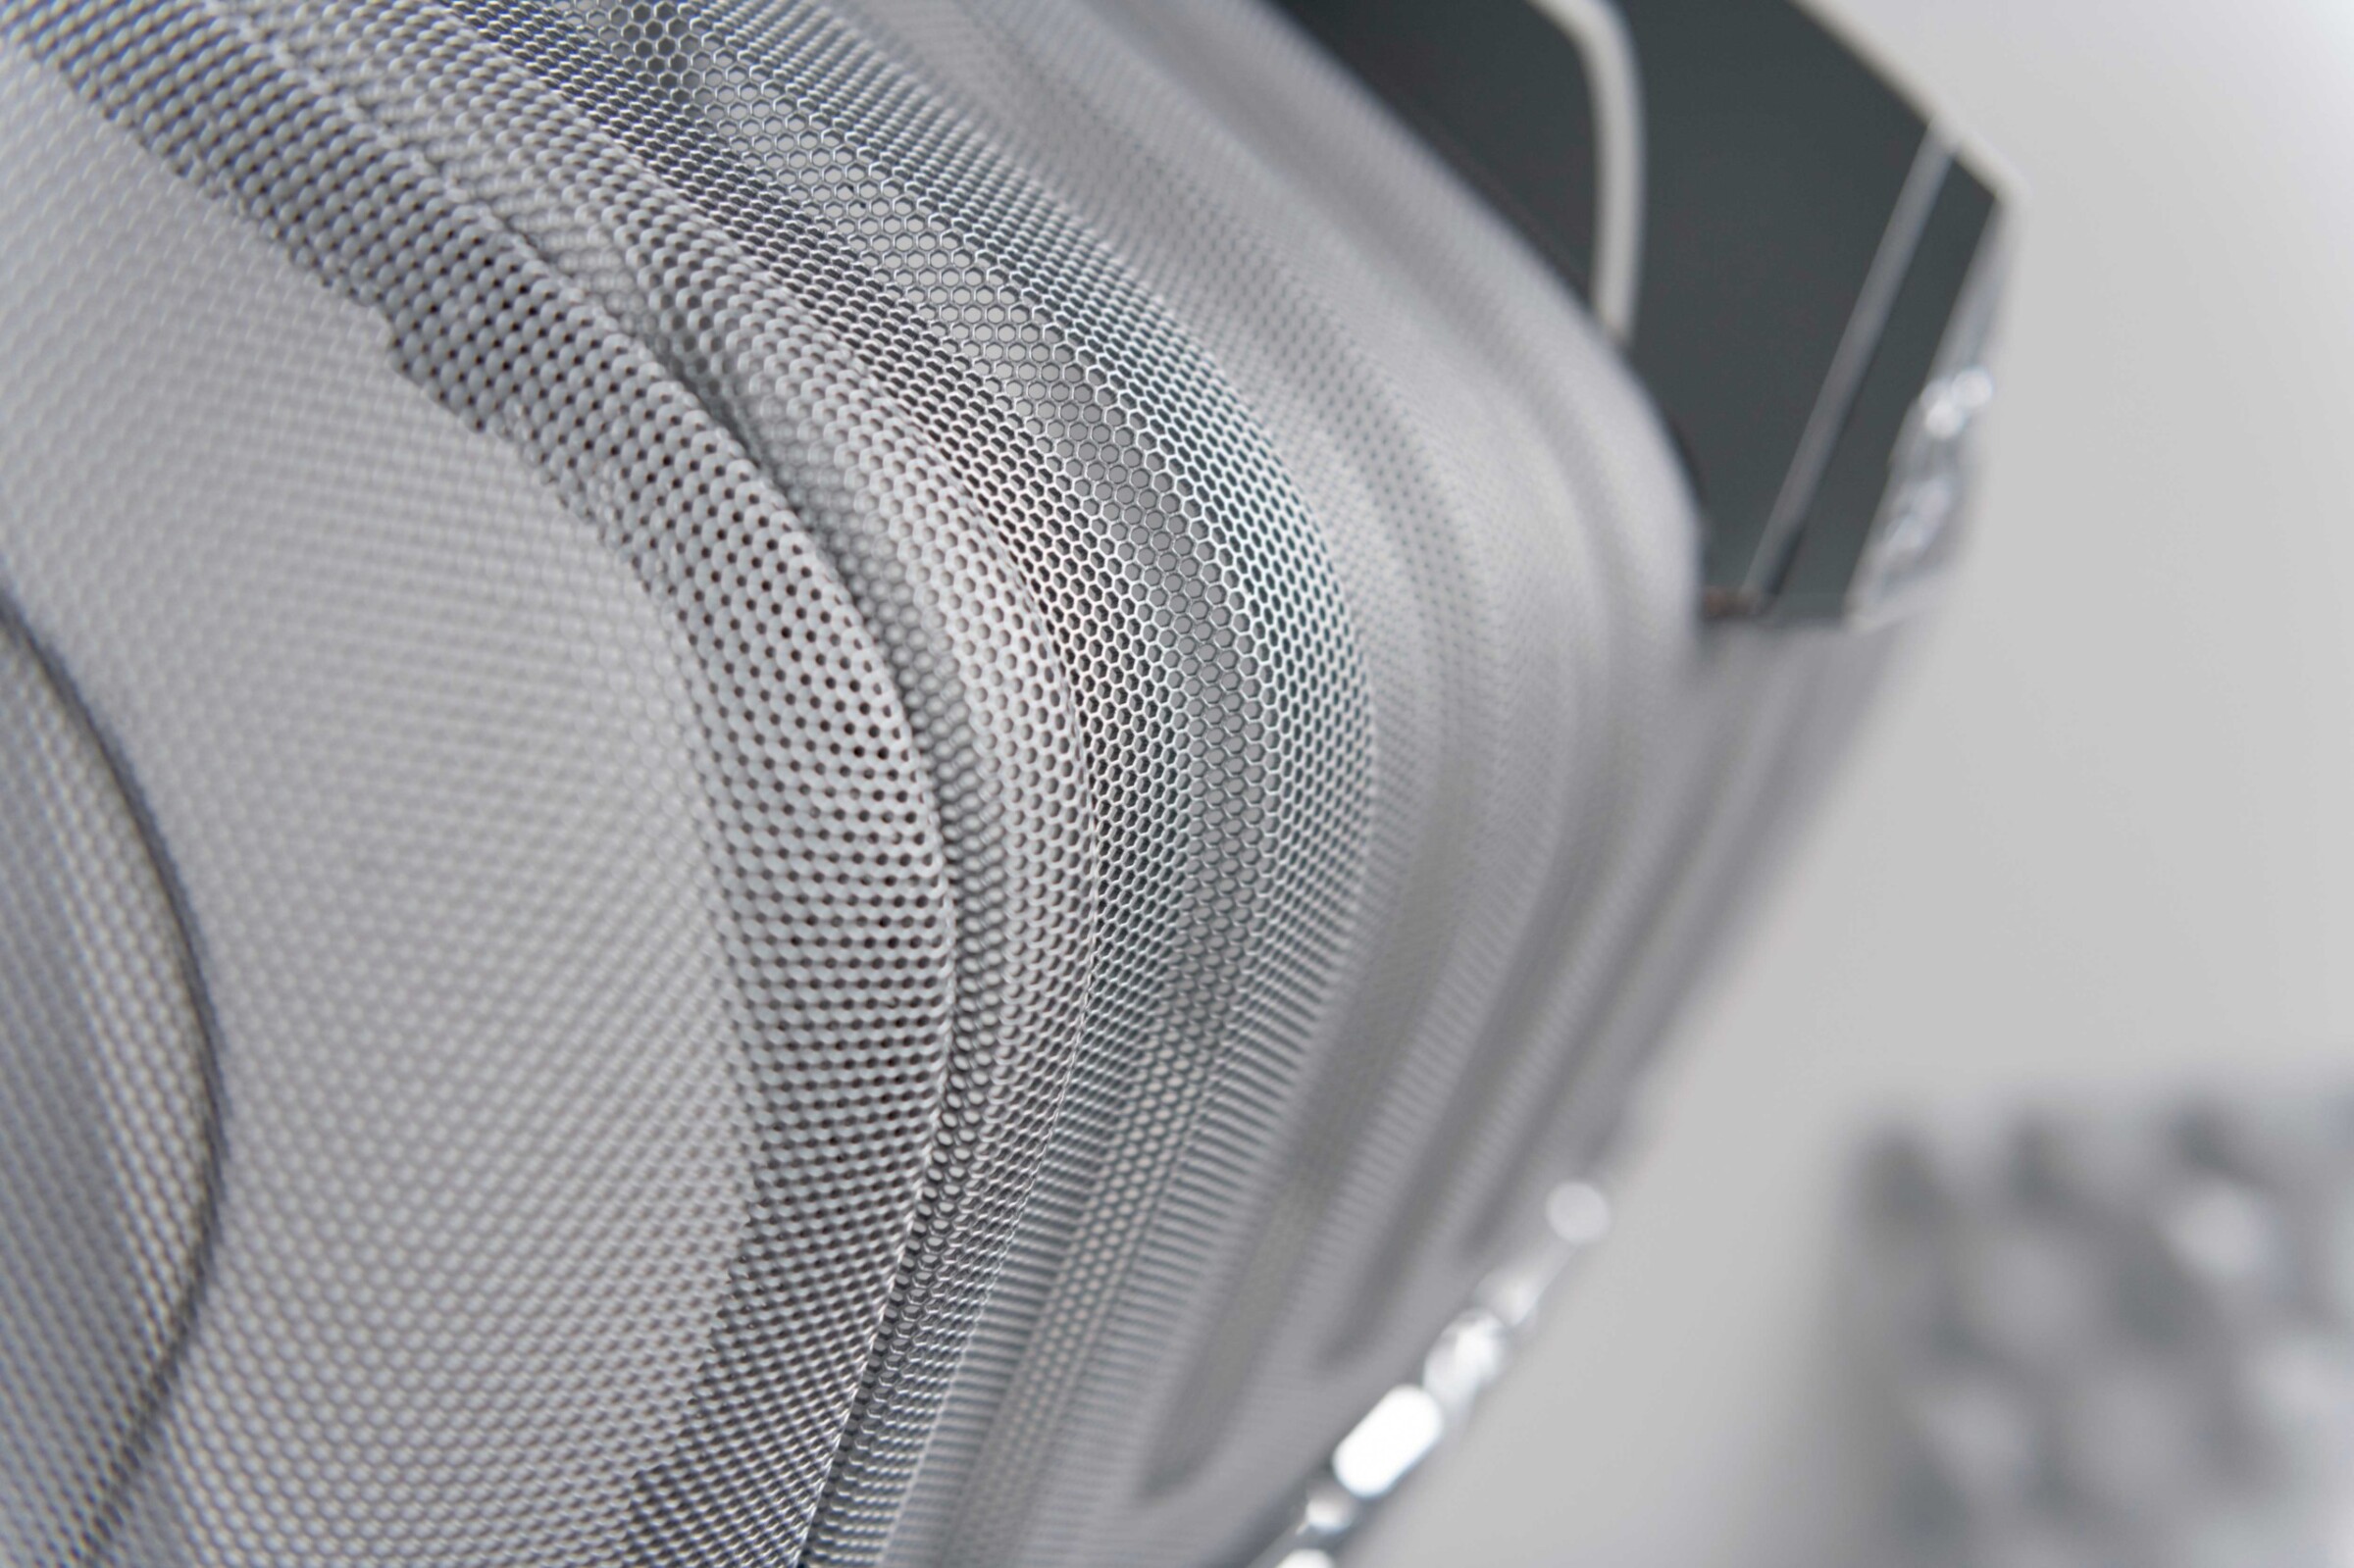 Made-to-measure perforated metal. Fast-track and customised.